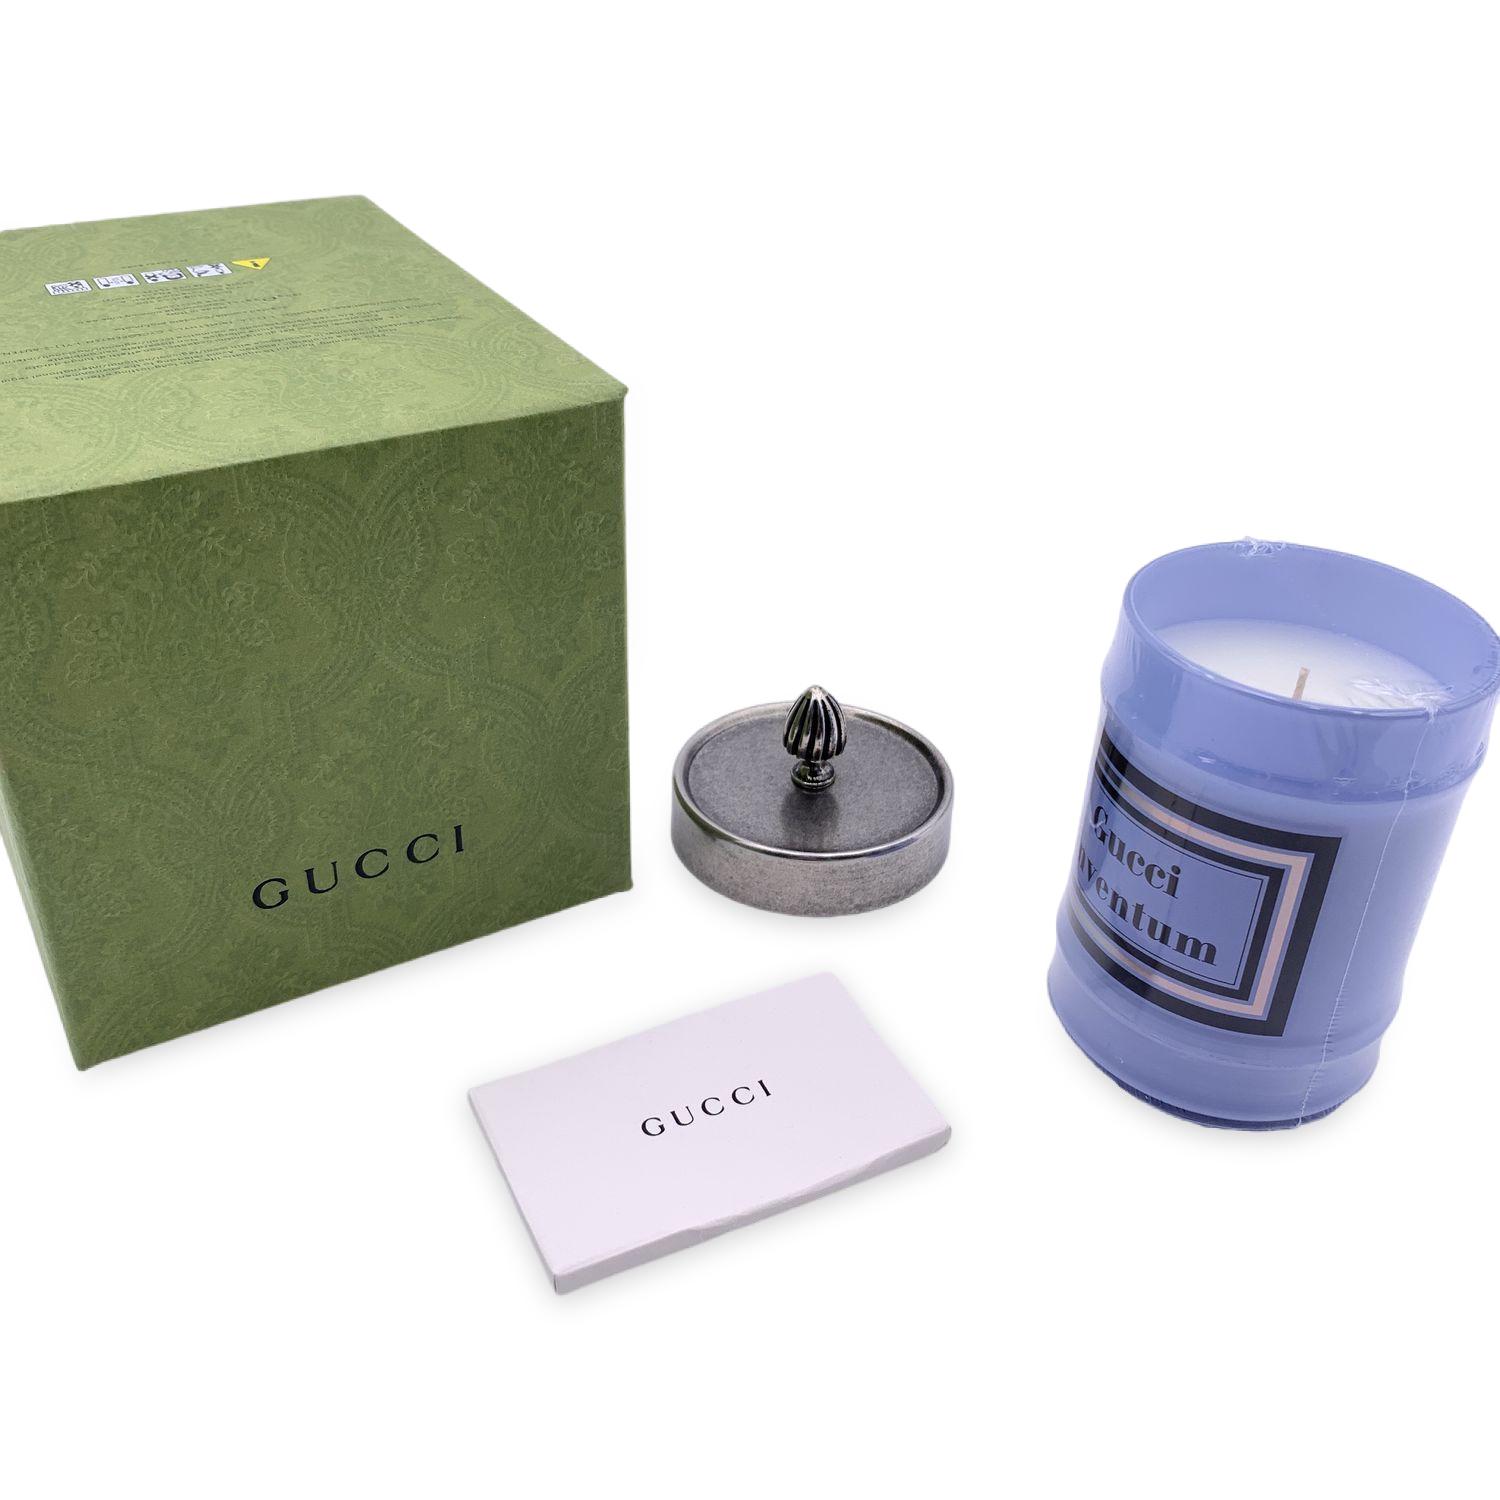 Beautiful Gucci 'Inventum' Scented candle. Wax is sscented with notes of pink rose and Taif Damask rose. It features a metal lid with an engraved knob, and the light blue glass jar (it may be repurposed once the candle has burned out).Made in Italy.